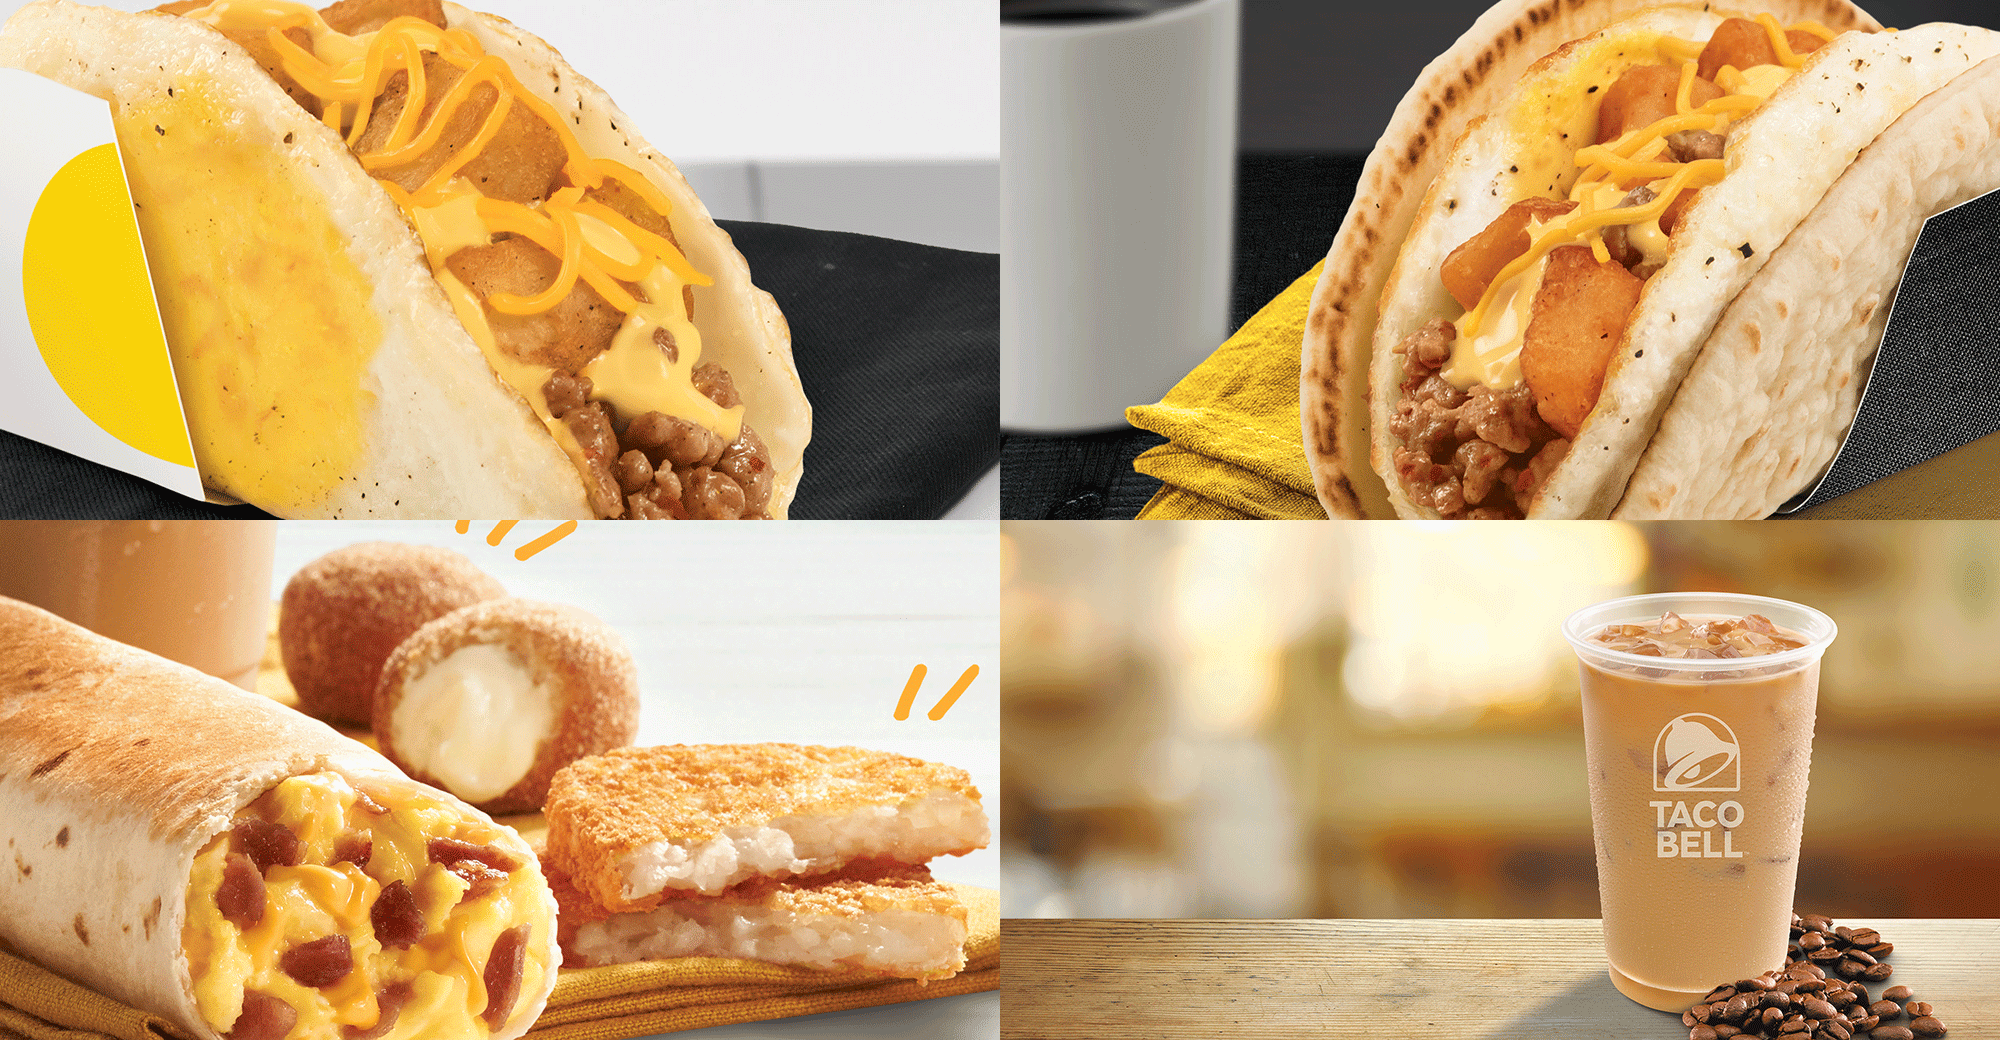 A look at Taco Bell's newest menu items Nation's Restaurant News